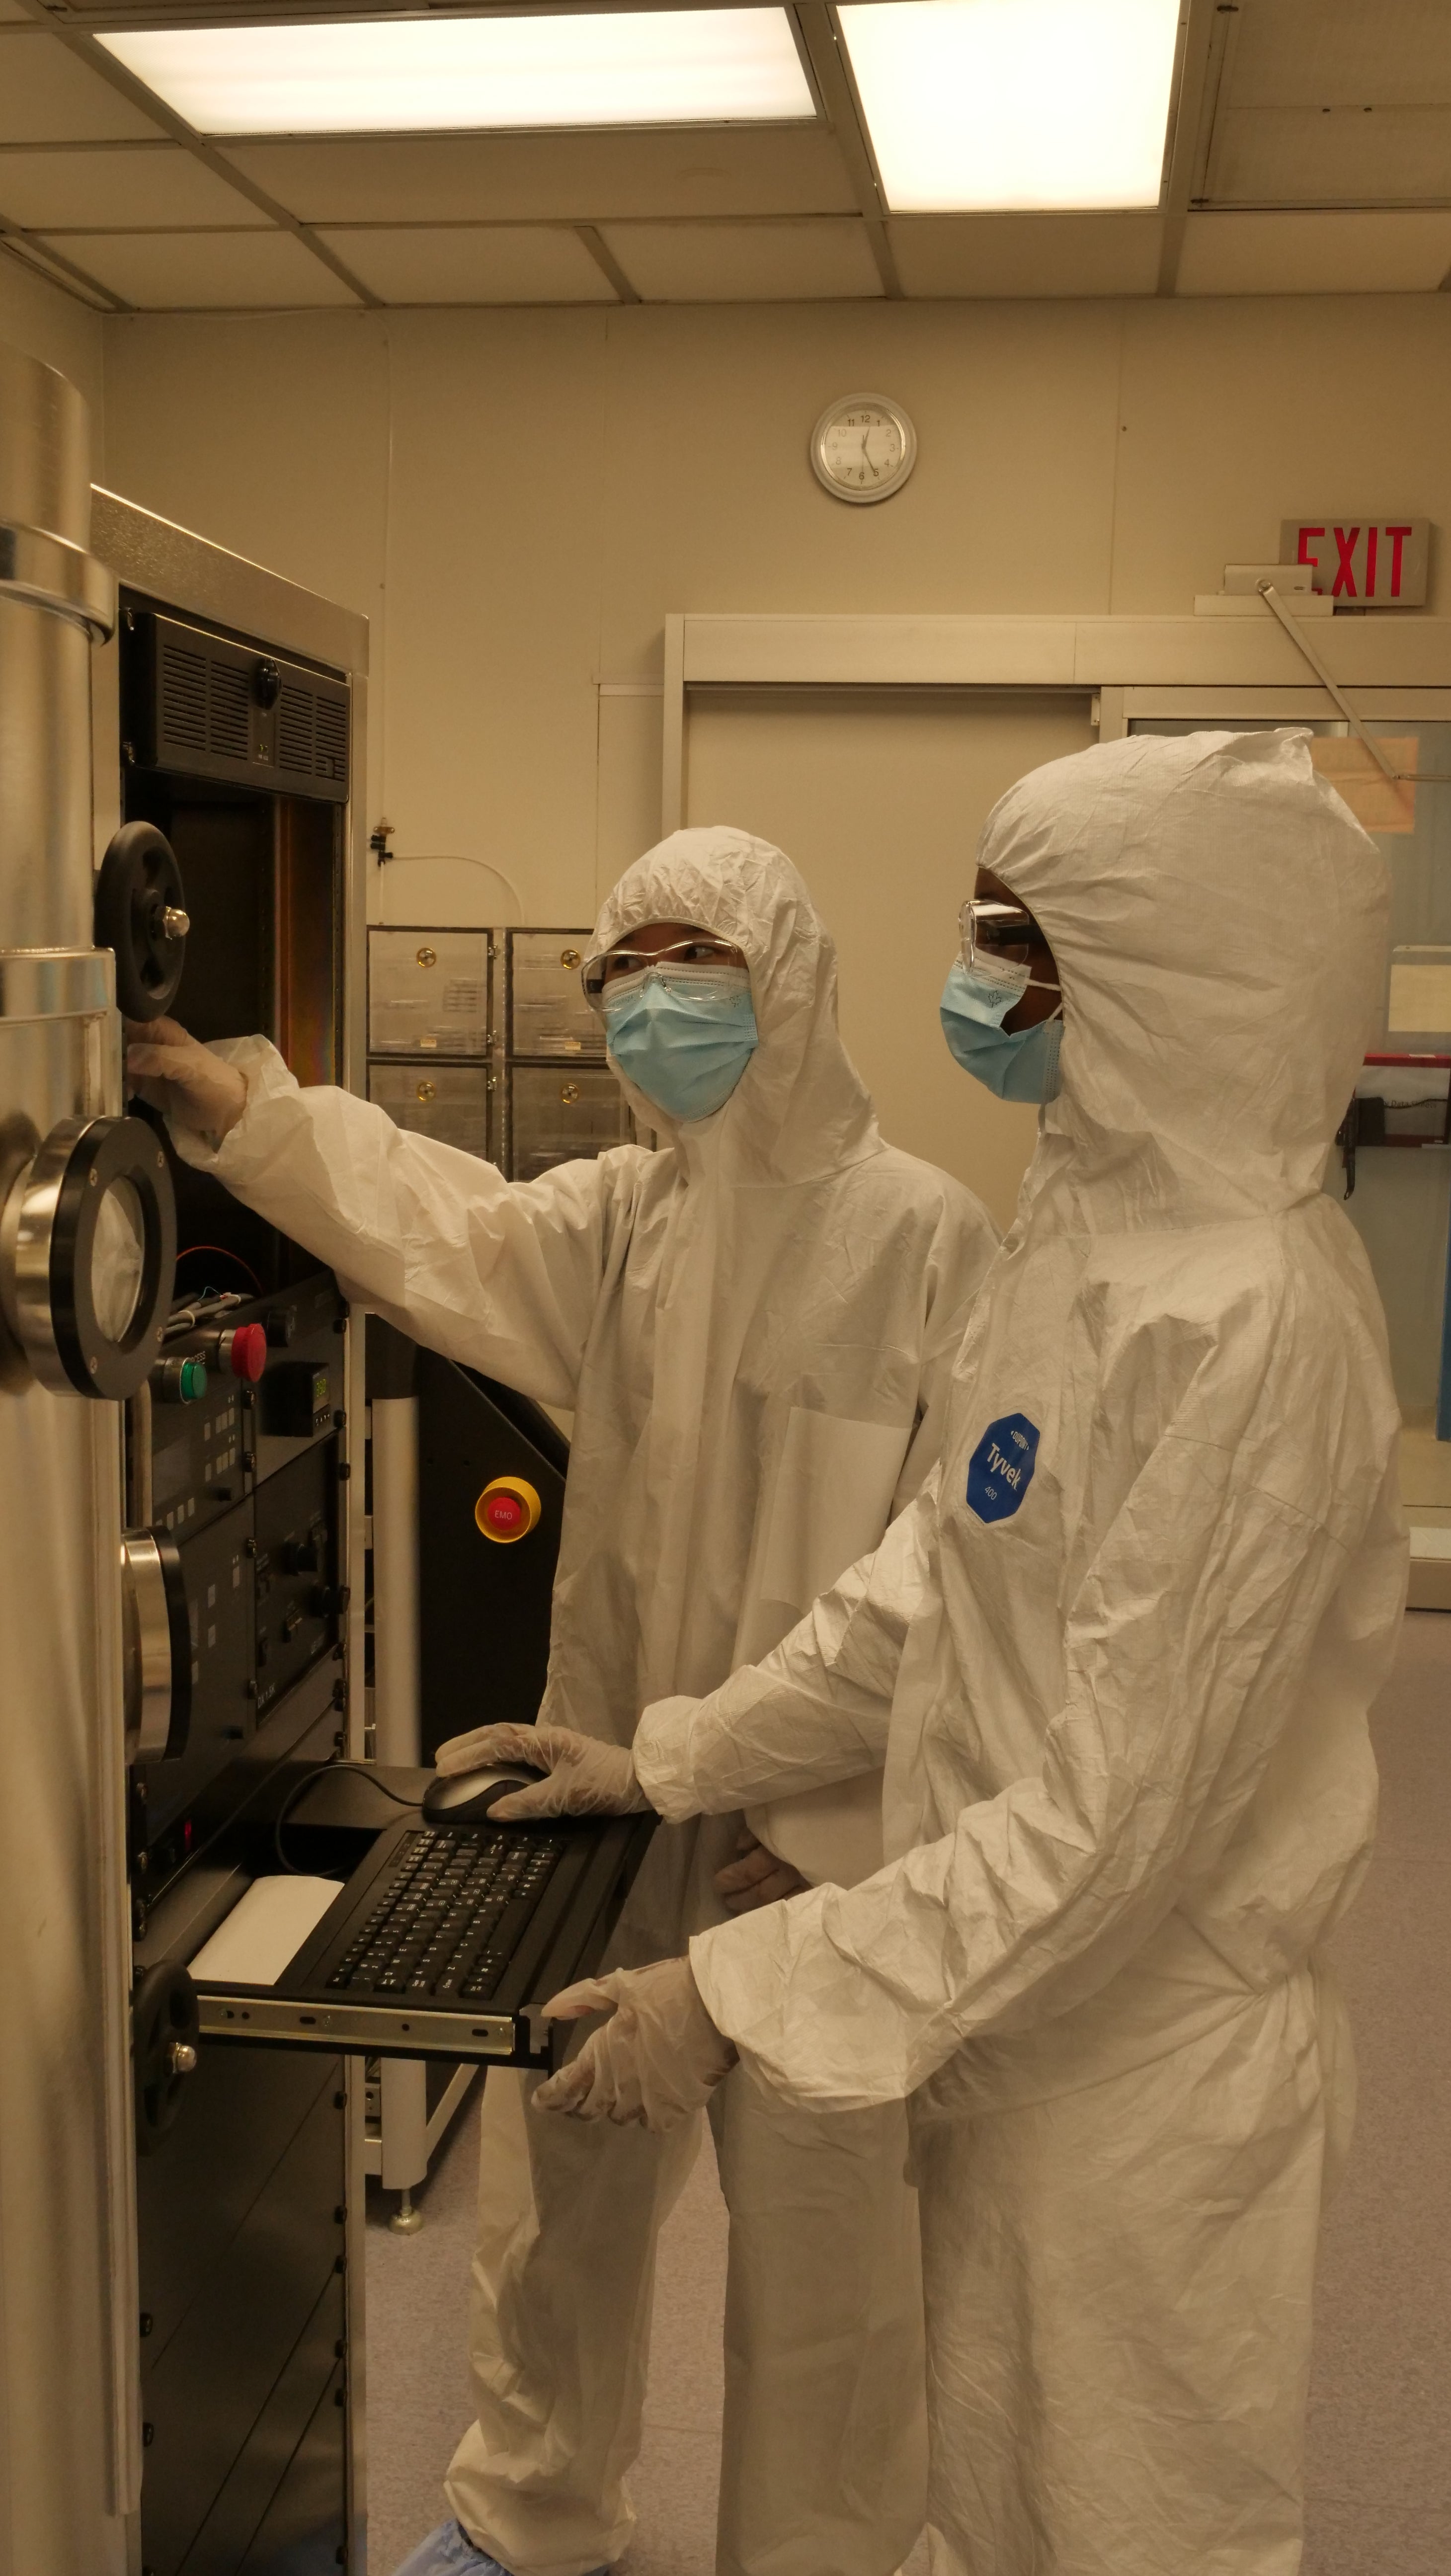 Two technicians working in the cleanroom